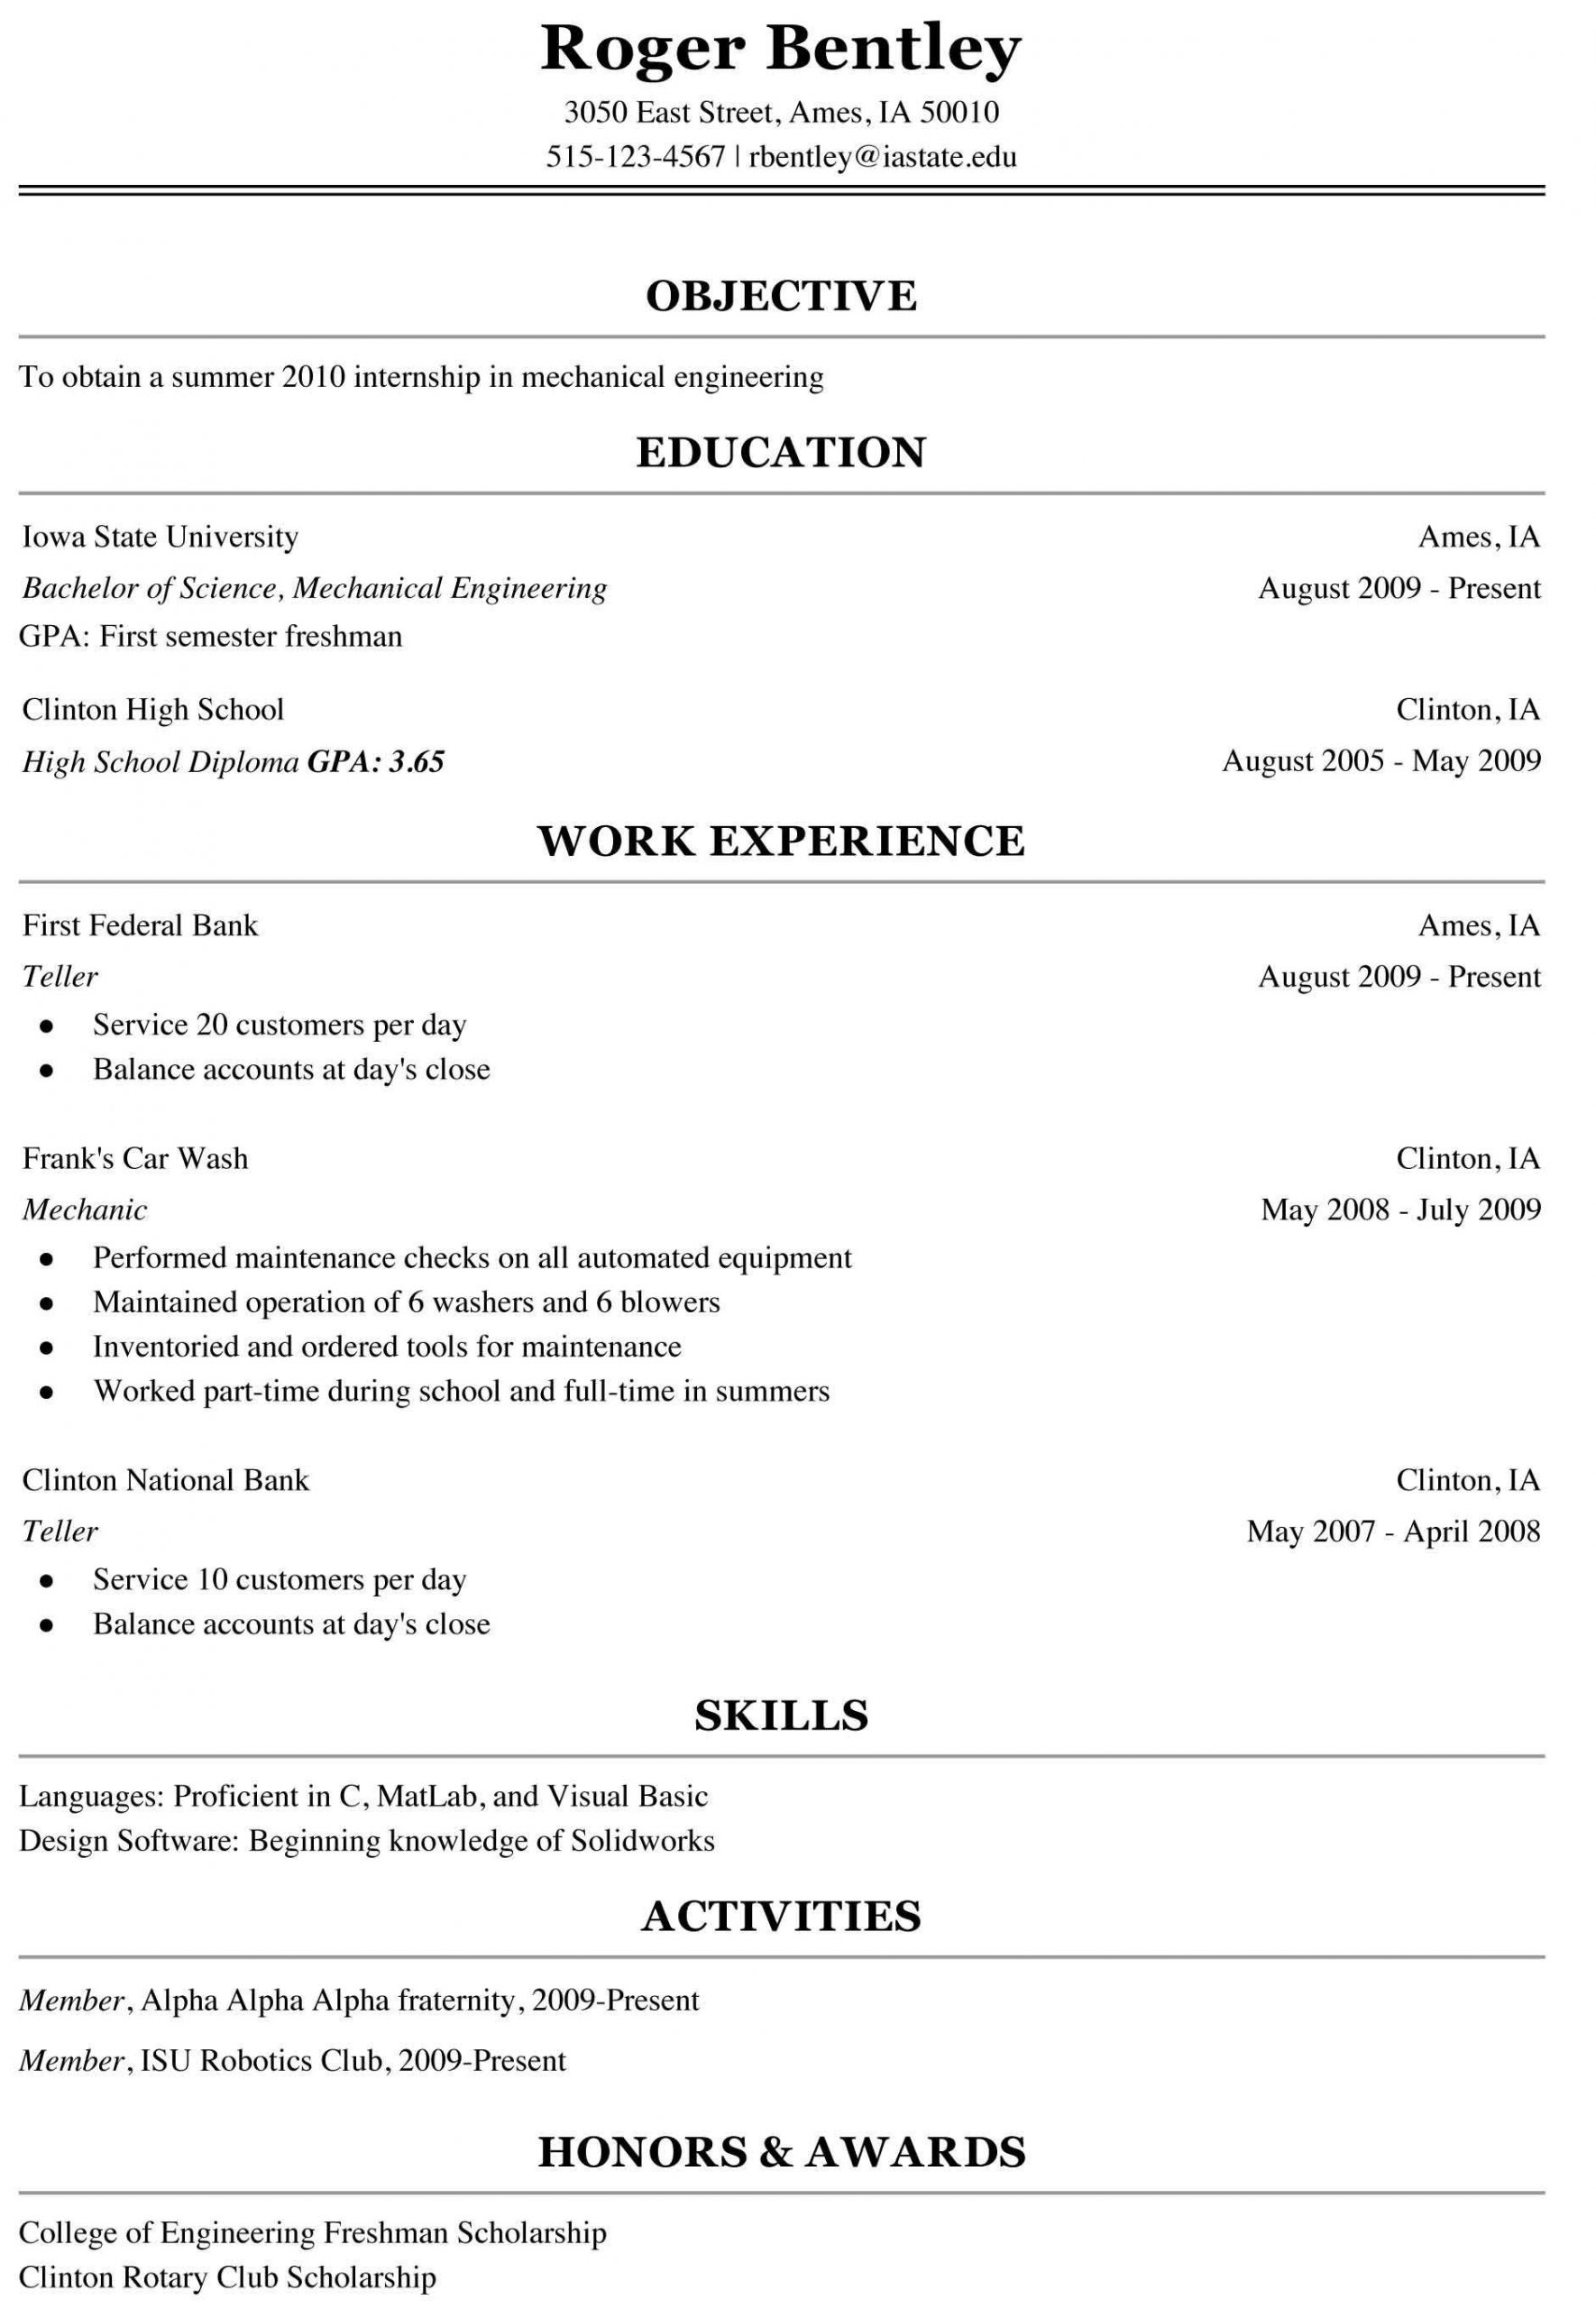 resume with no work experience college student pdf